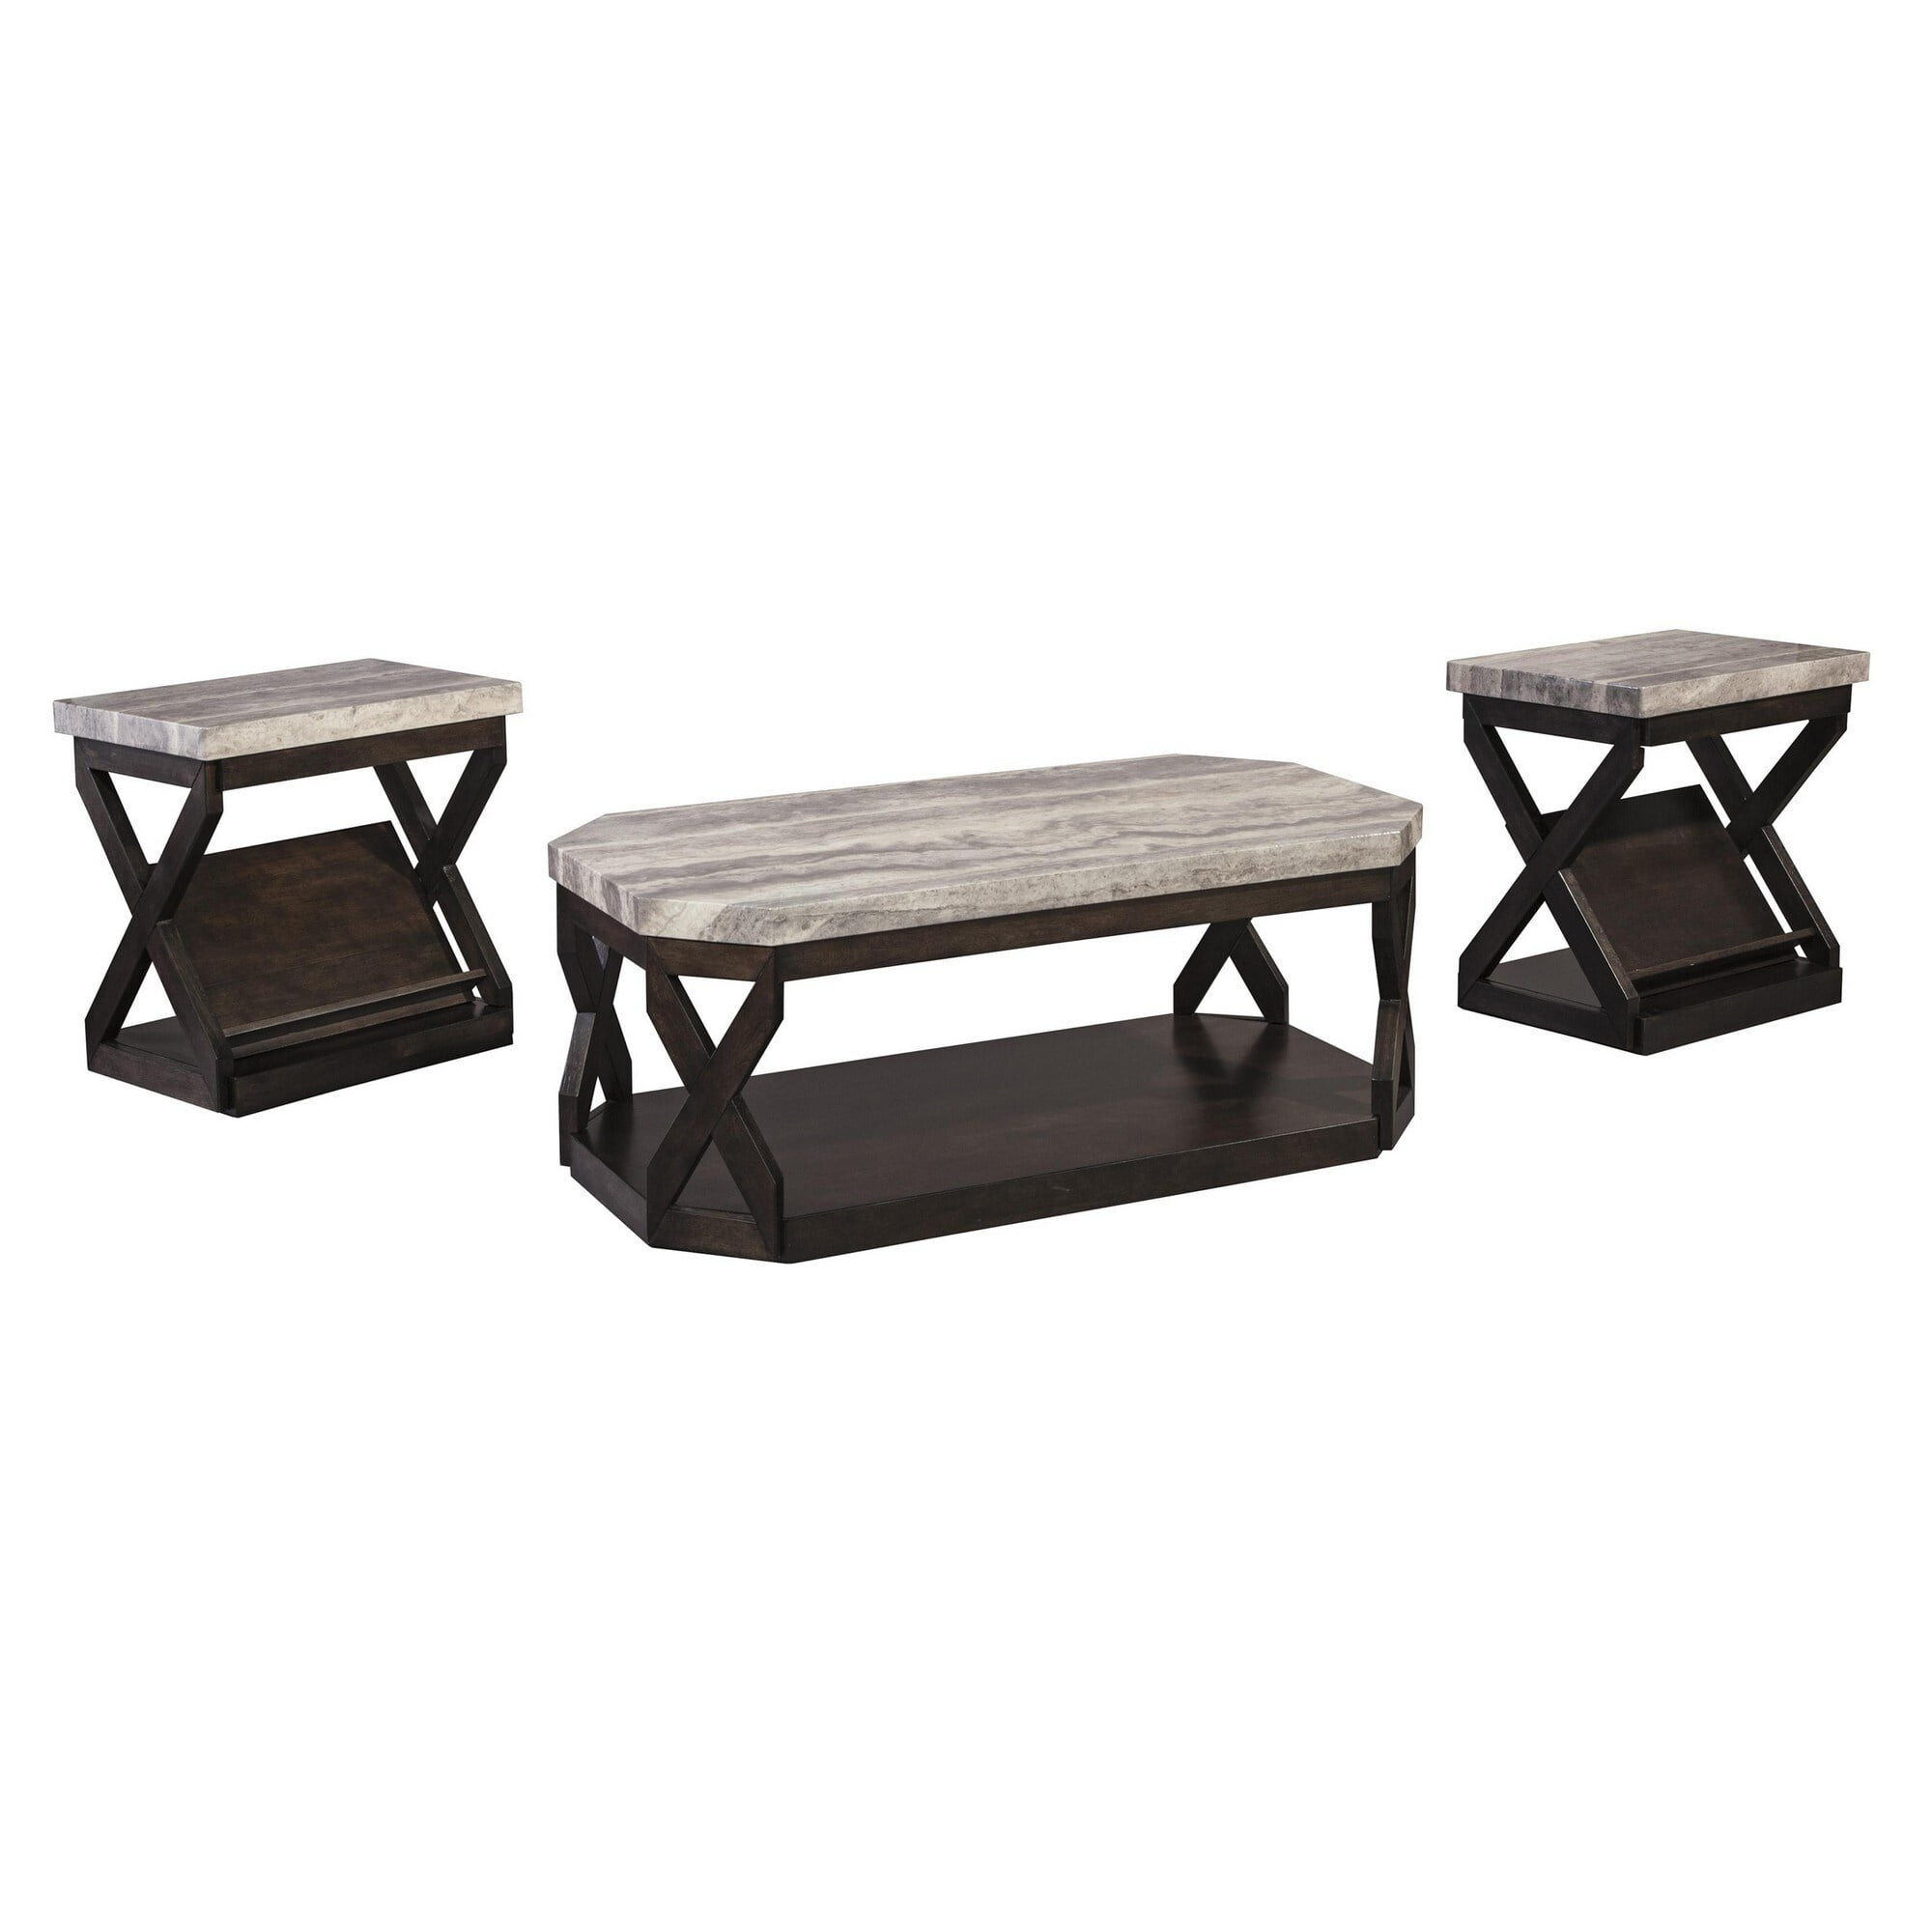 Picture of Benjara BM213404 Faux Marble Table Set with 1 Coffee Table & 2 End Tables - Gray & Brown - 19.25 x 48.13 x 24.13 in.